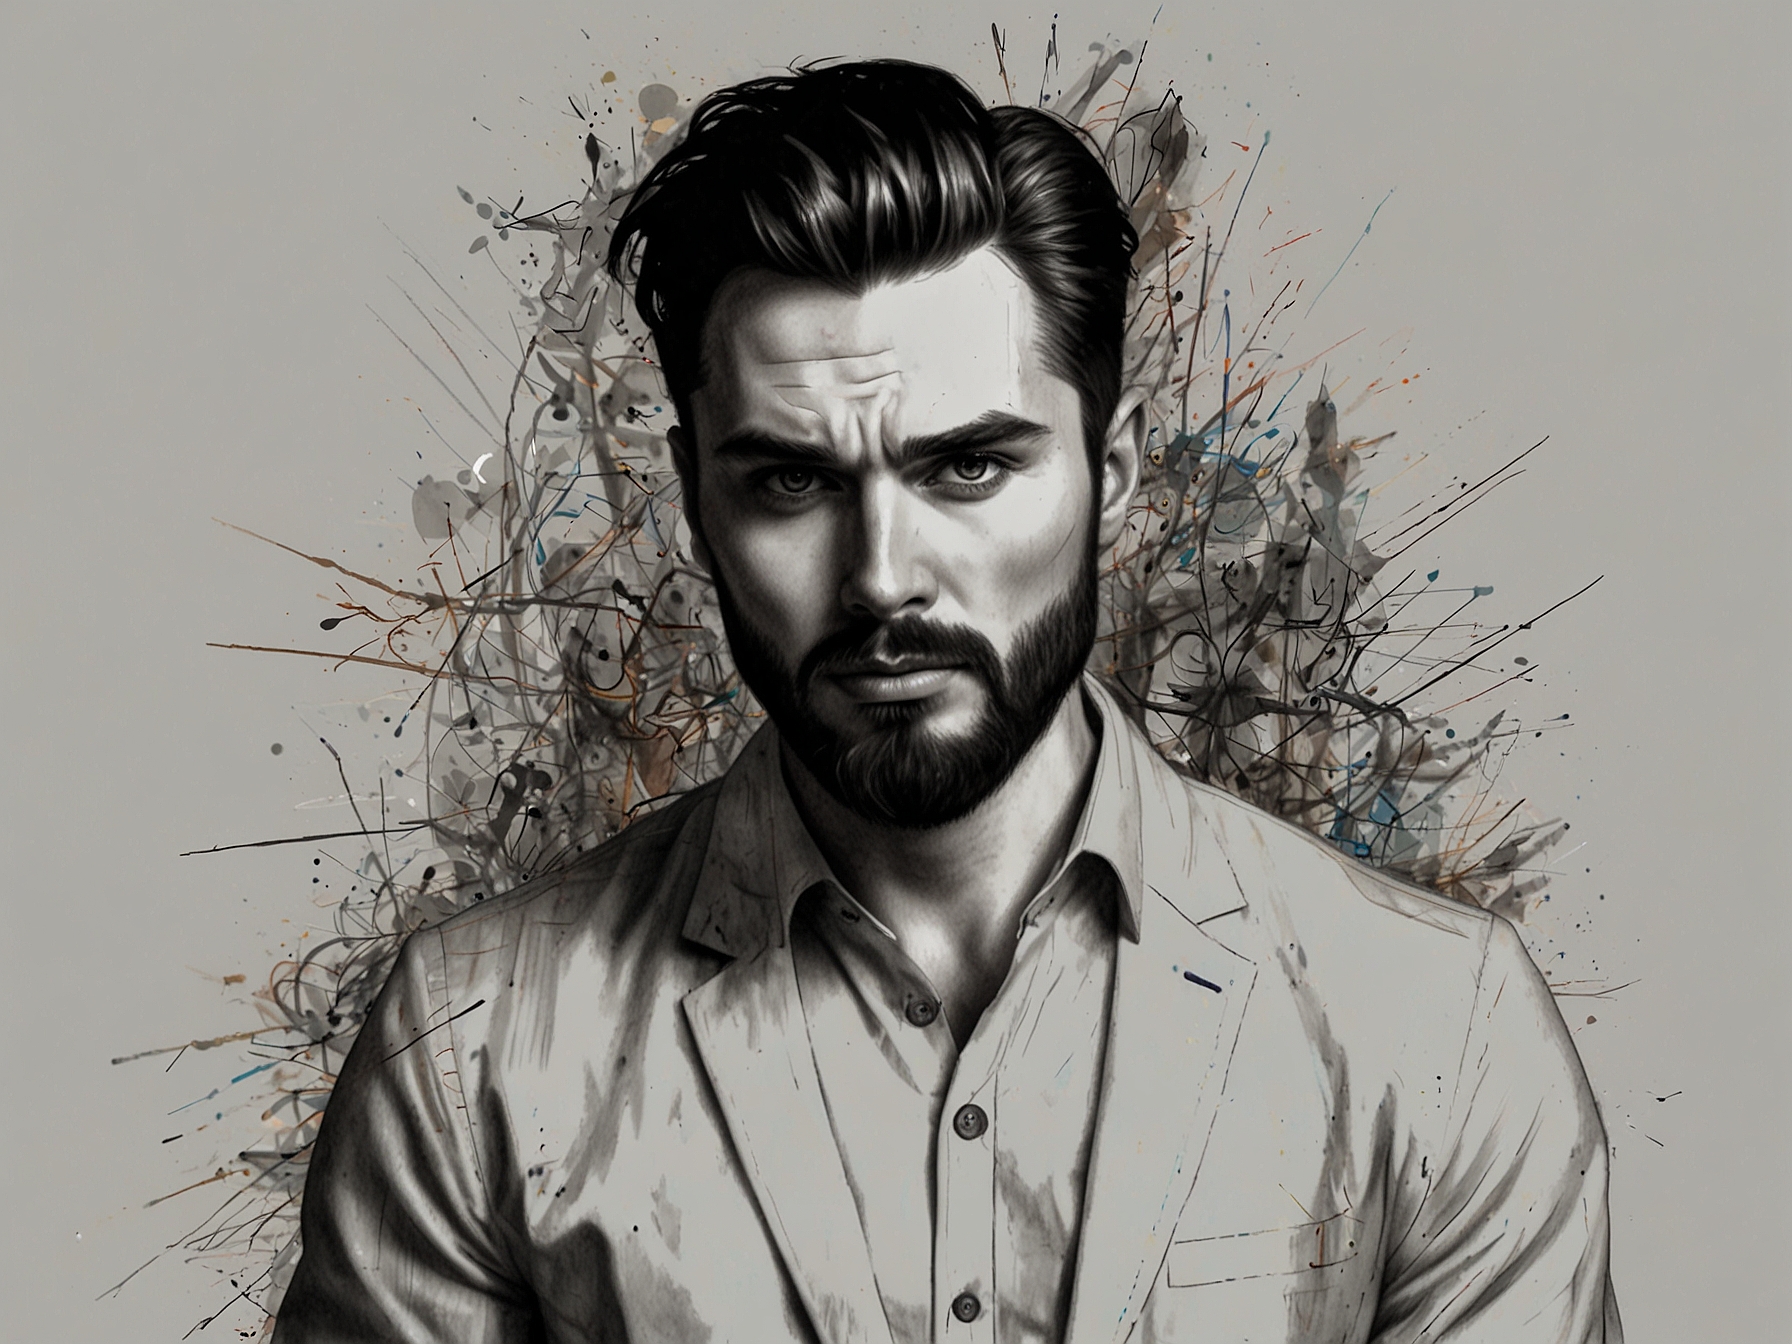 An artistic representation of psychological distress manifesting as physical symptoms like the loss of speech and sight, as experienced by Rylan Clark.